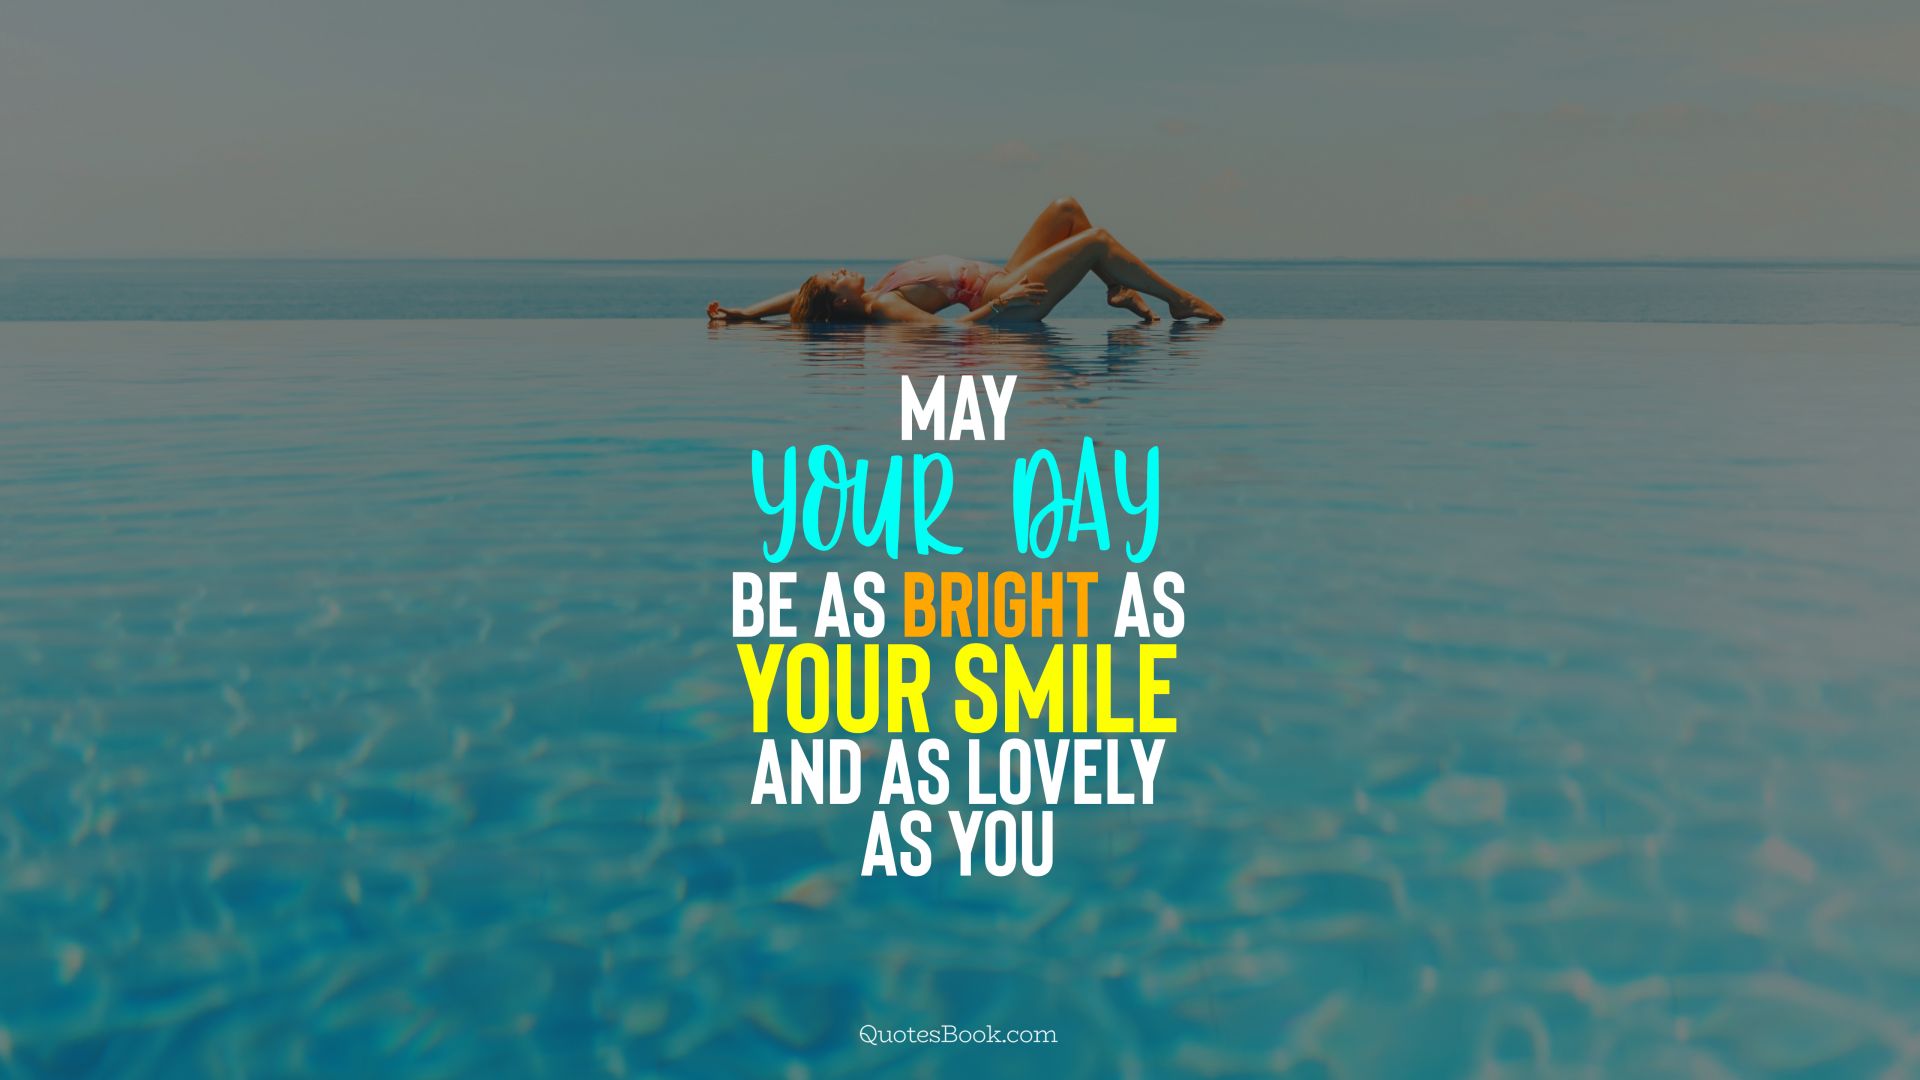 May your day be as bright as your smile and as lovely as you